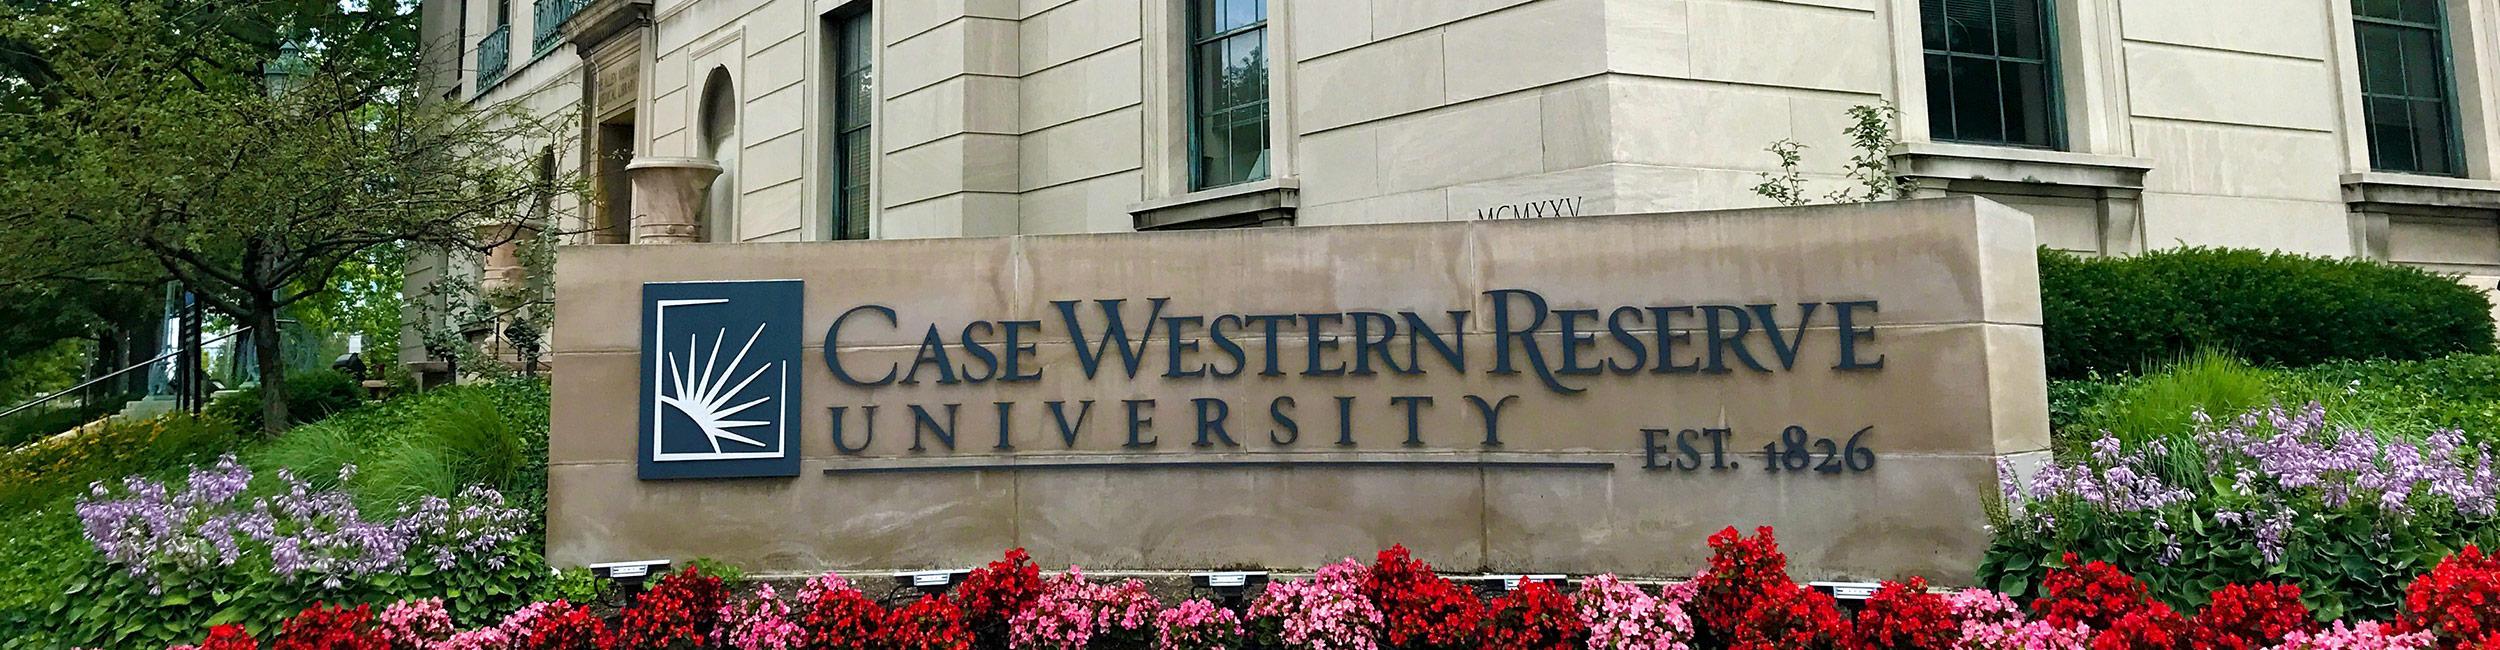 CWRU sign surrounded by flowers